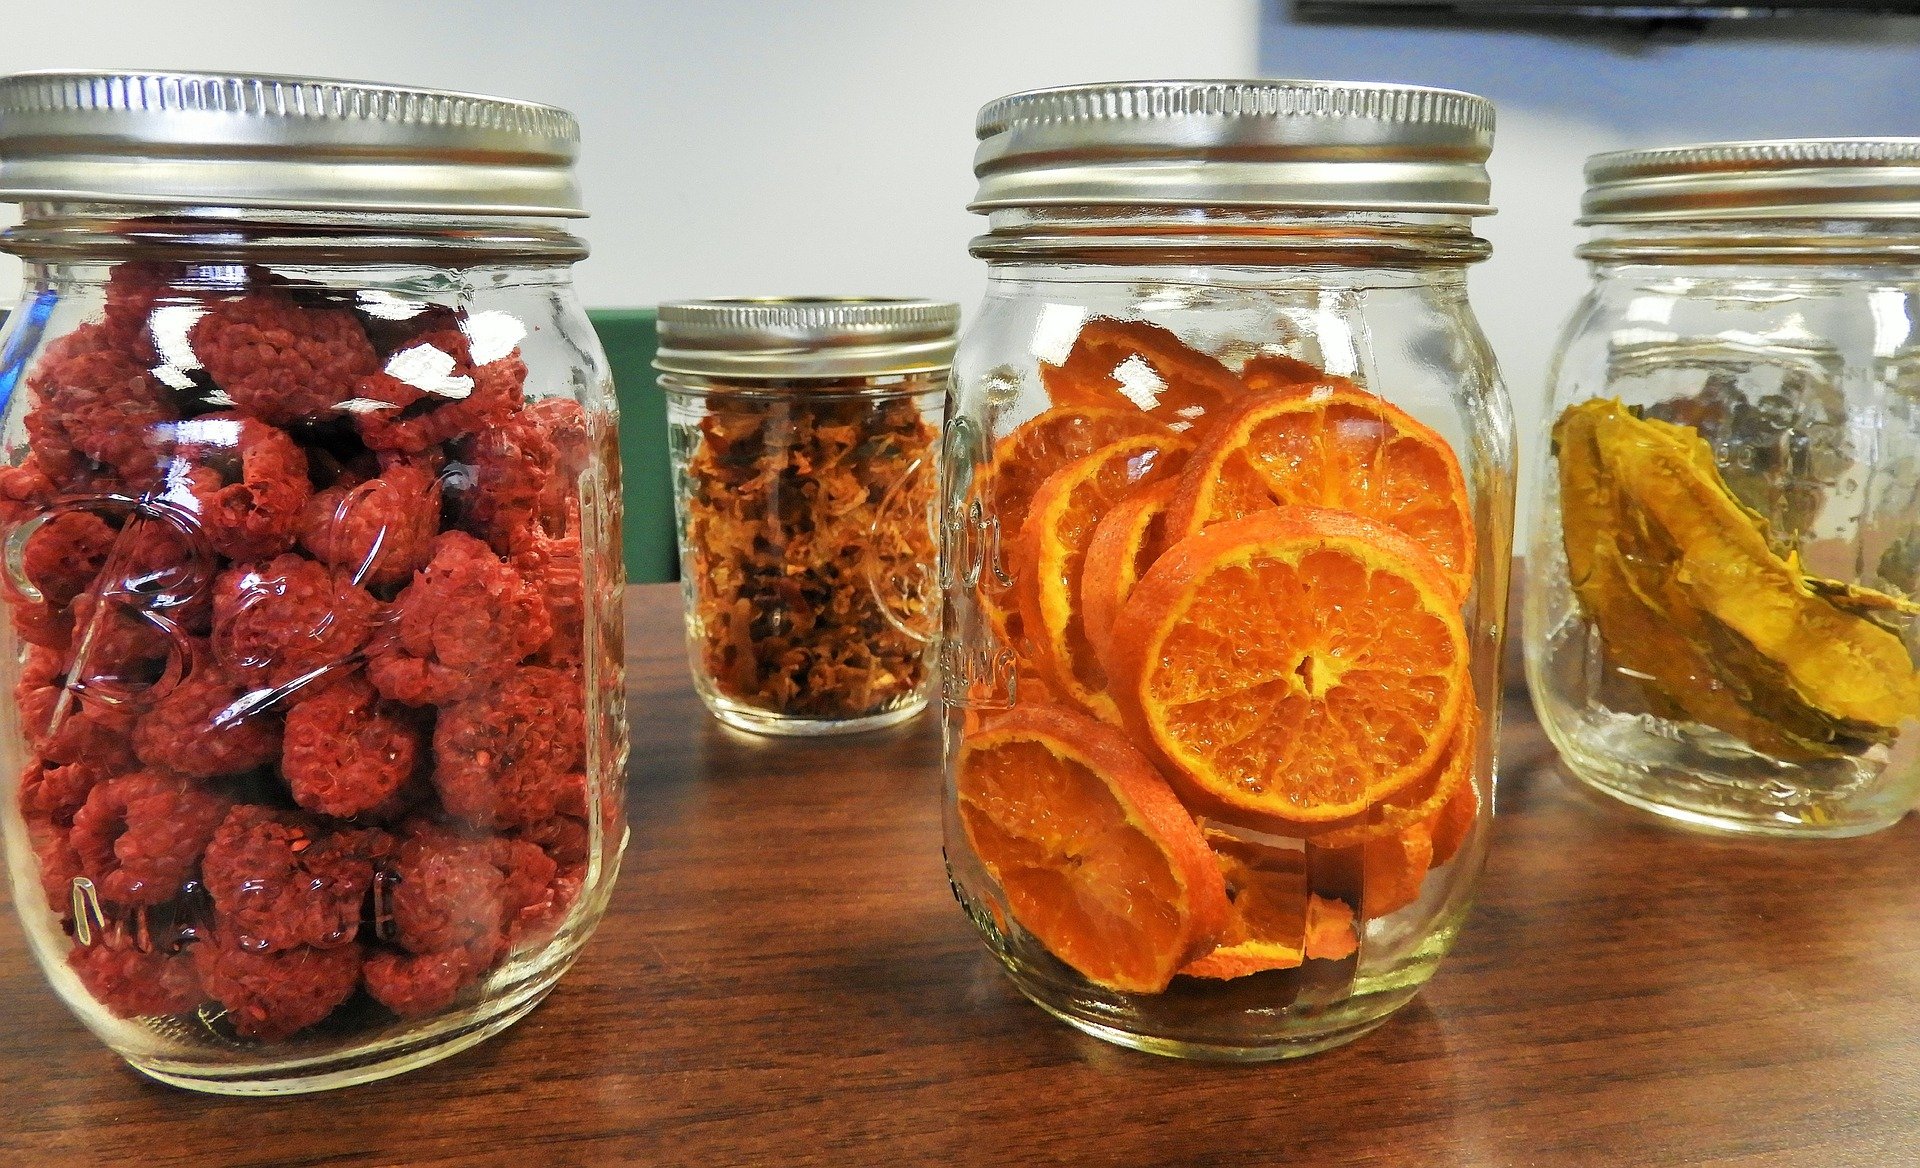 Mason jars of food that needs to be rotated according to our prepper’s spring to-do list